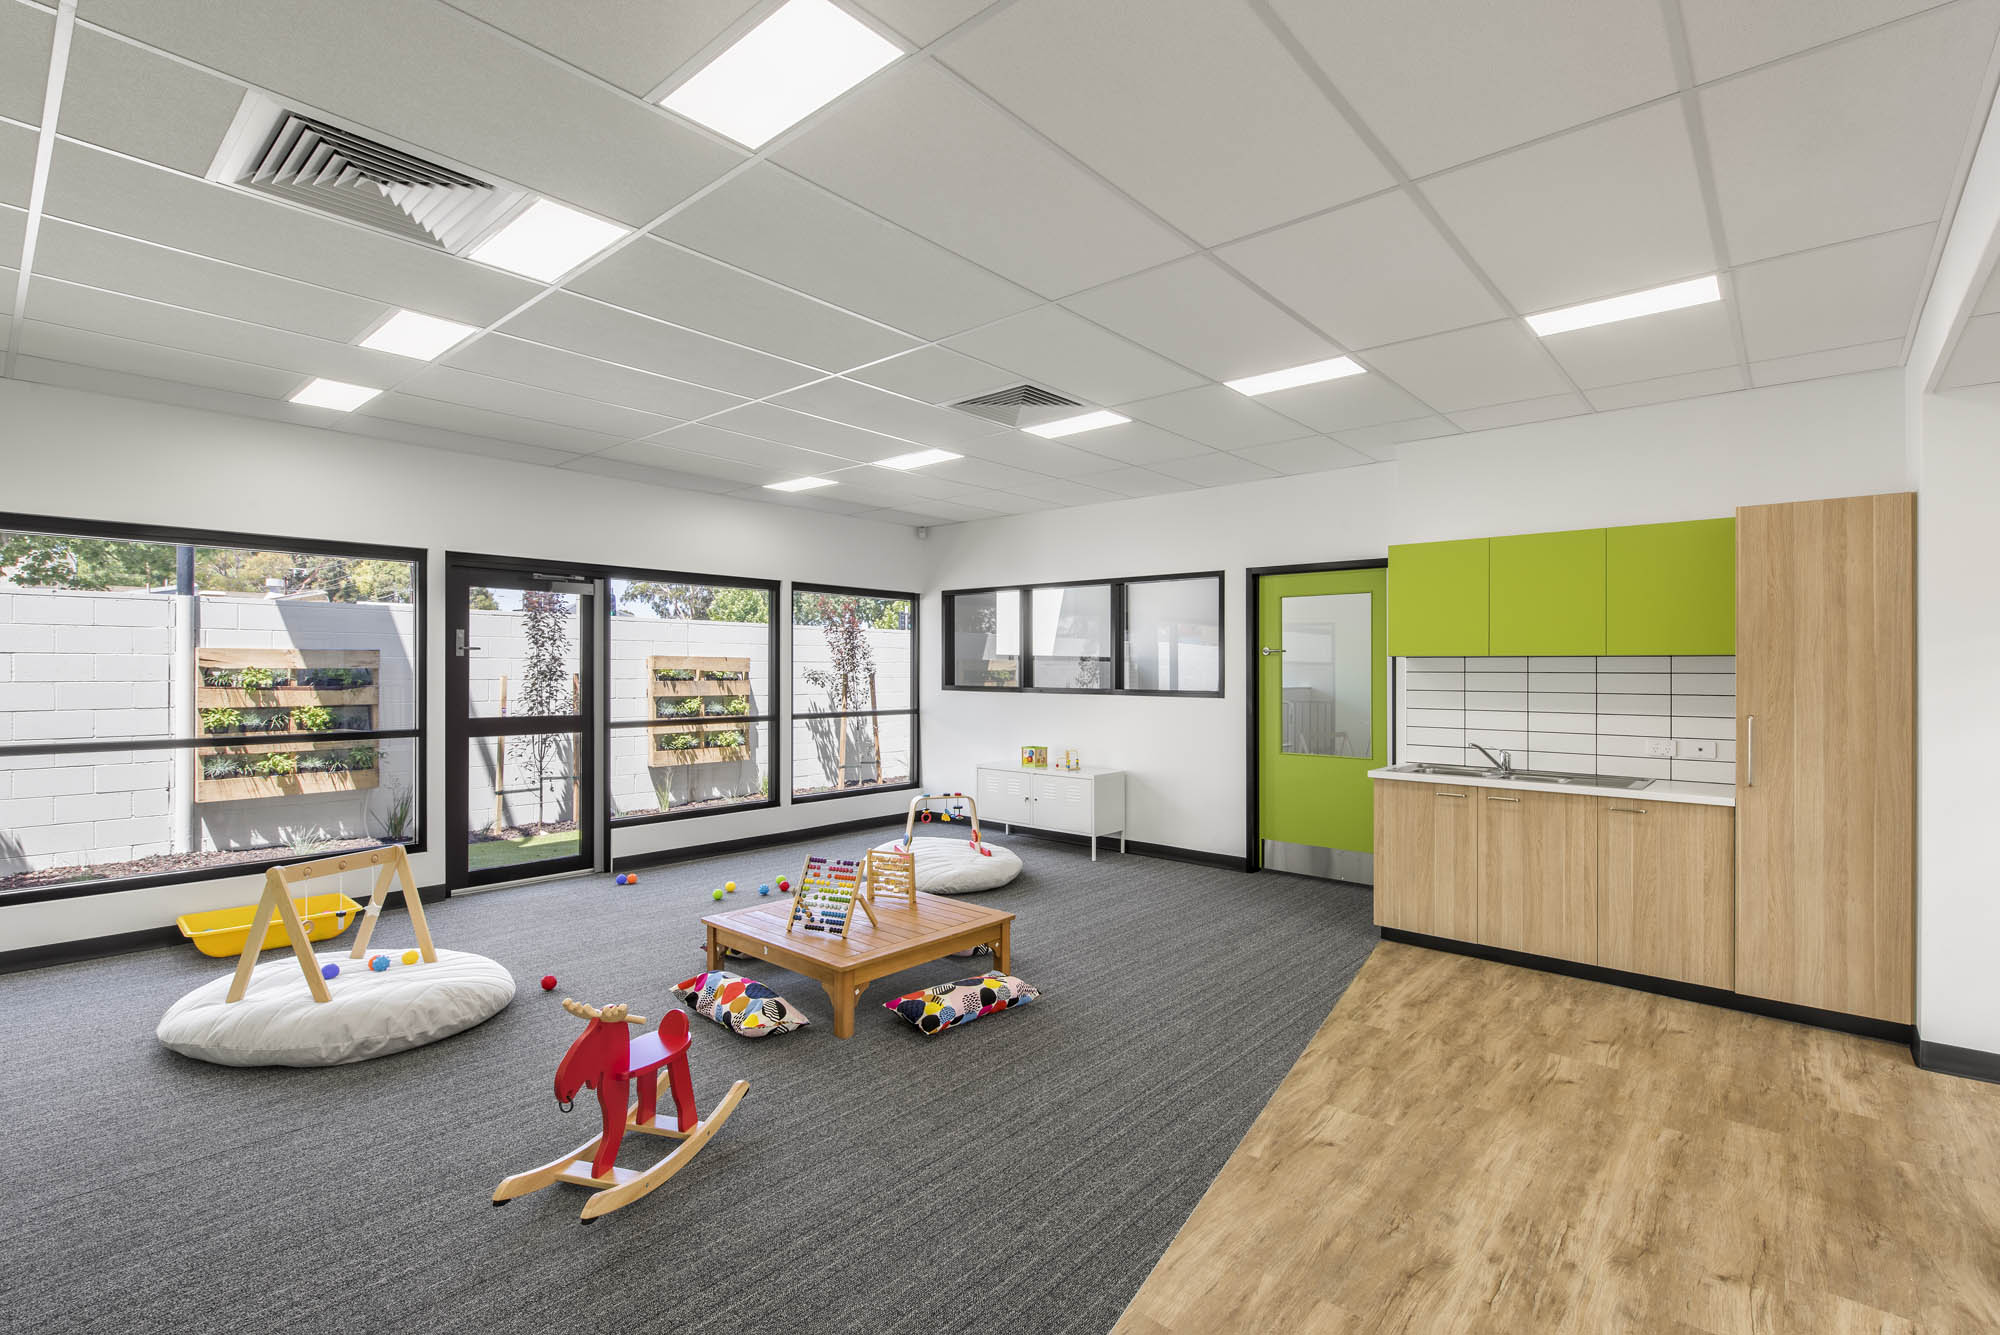 Treetops early learning centre kindergarten fitout adelaide construction education play room vertical garden kitchenette timber flooring carpet